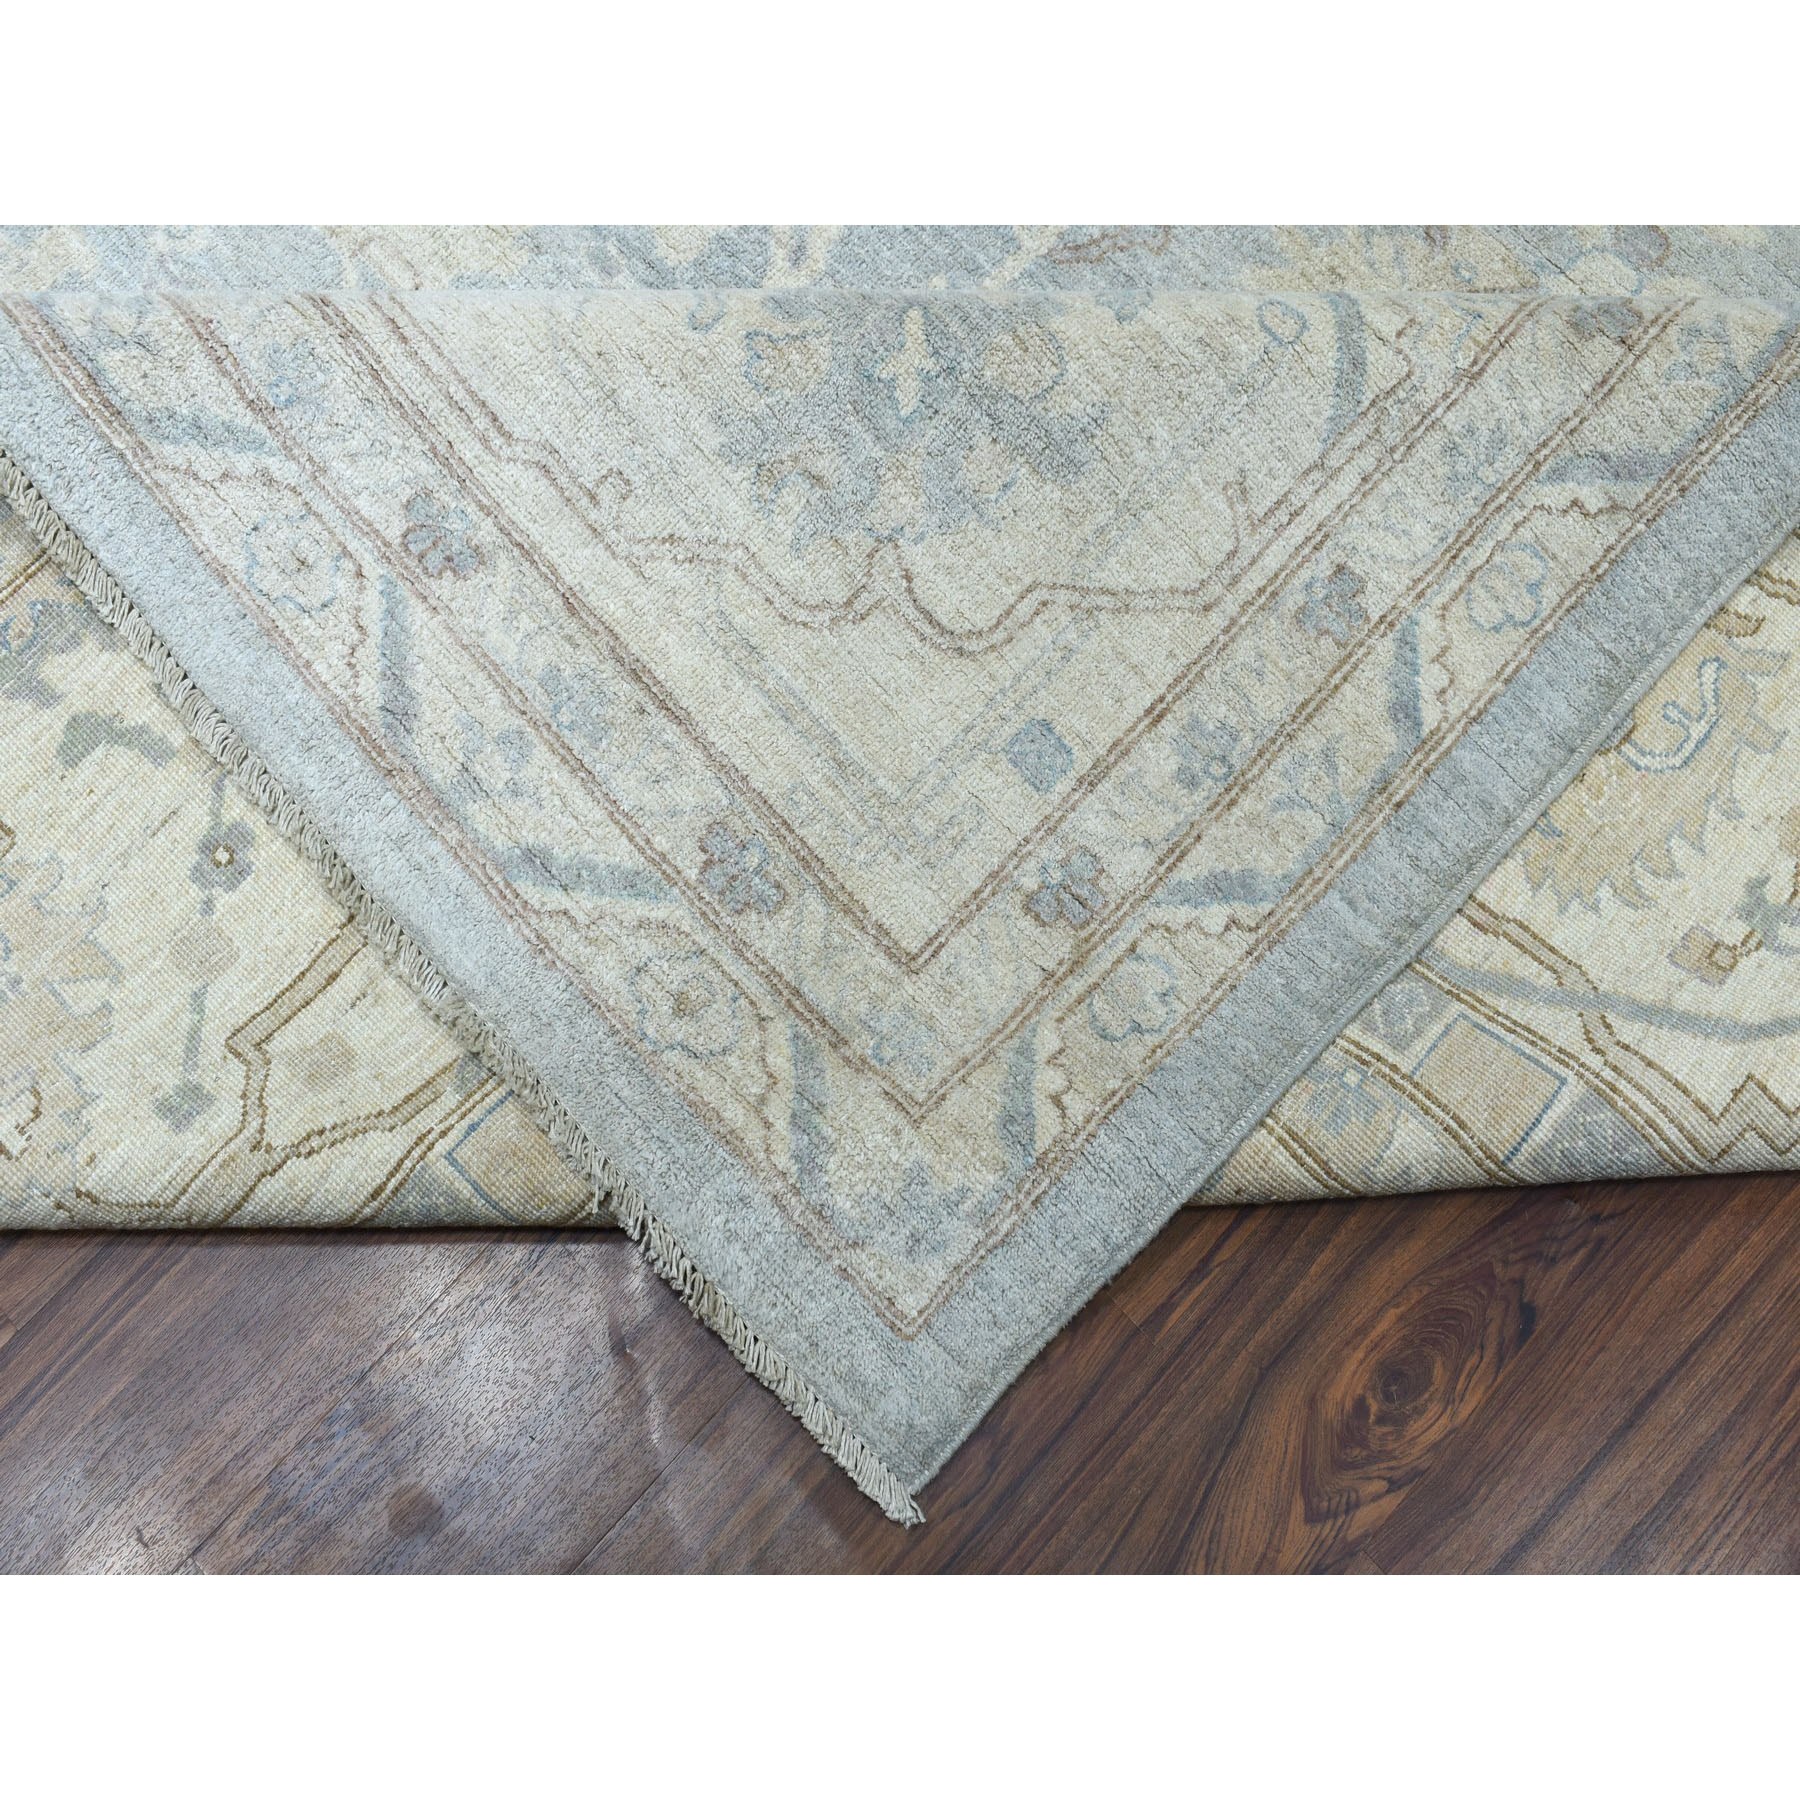 12-8 x19-9  Oversized White Wash Peshawar Pure Wool Hand-Knotted Oriental Rug 